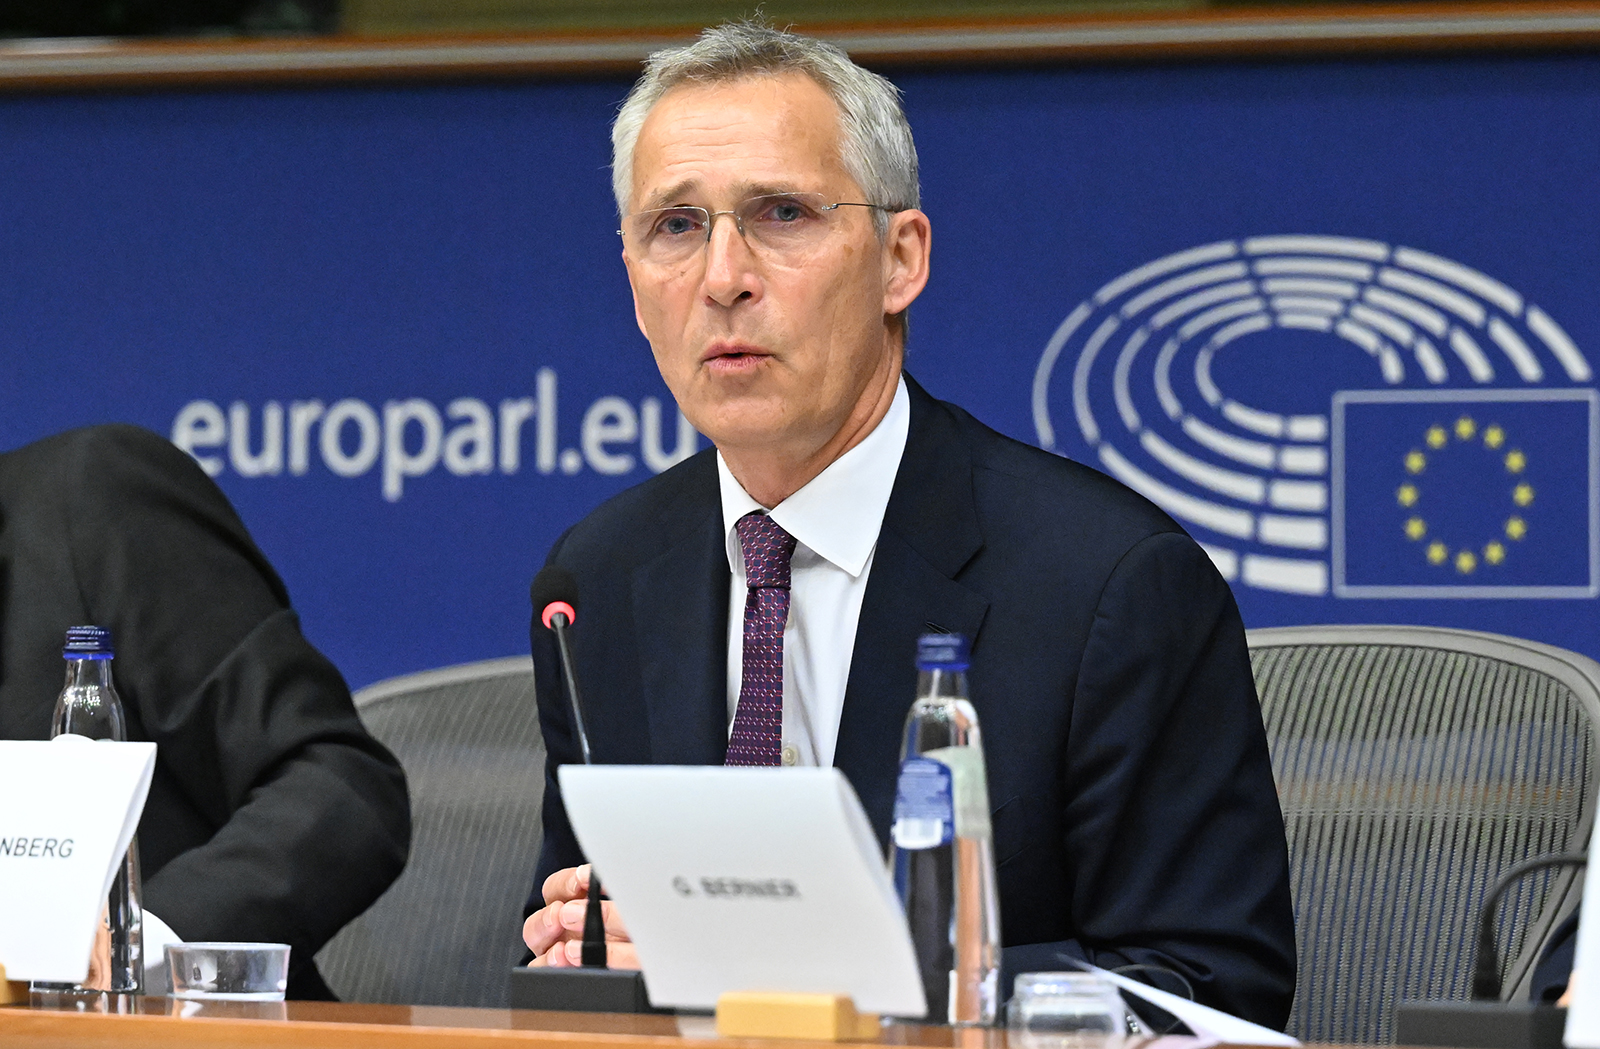 Jens Stoltenberg speaks during the European Parliament Foreign Affairs Committee meeting in Brussels, Belgium on September 7.